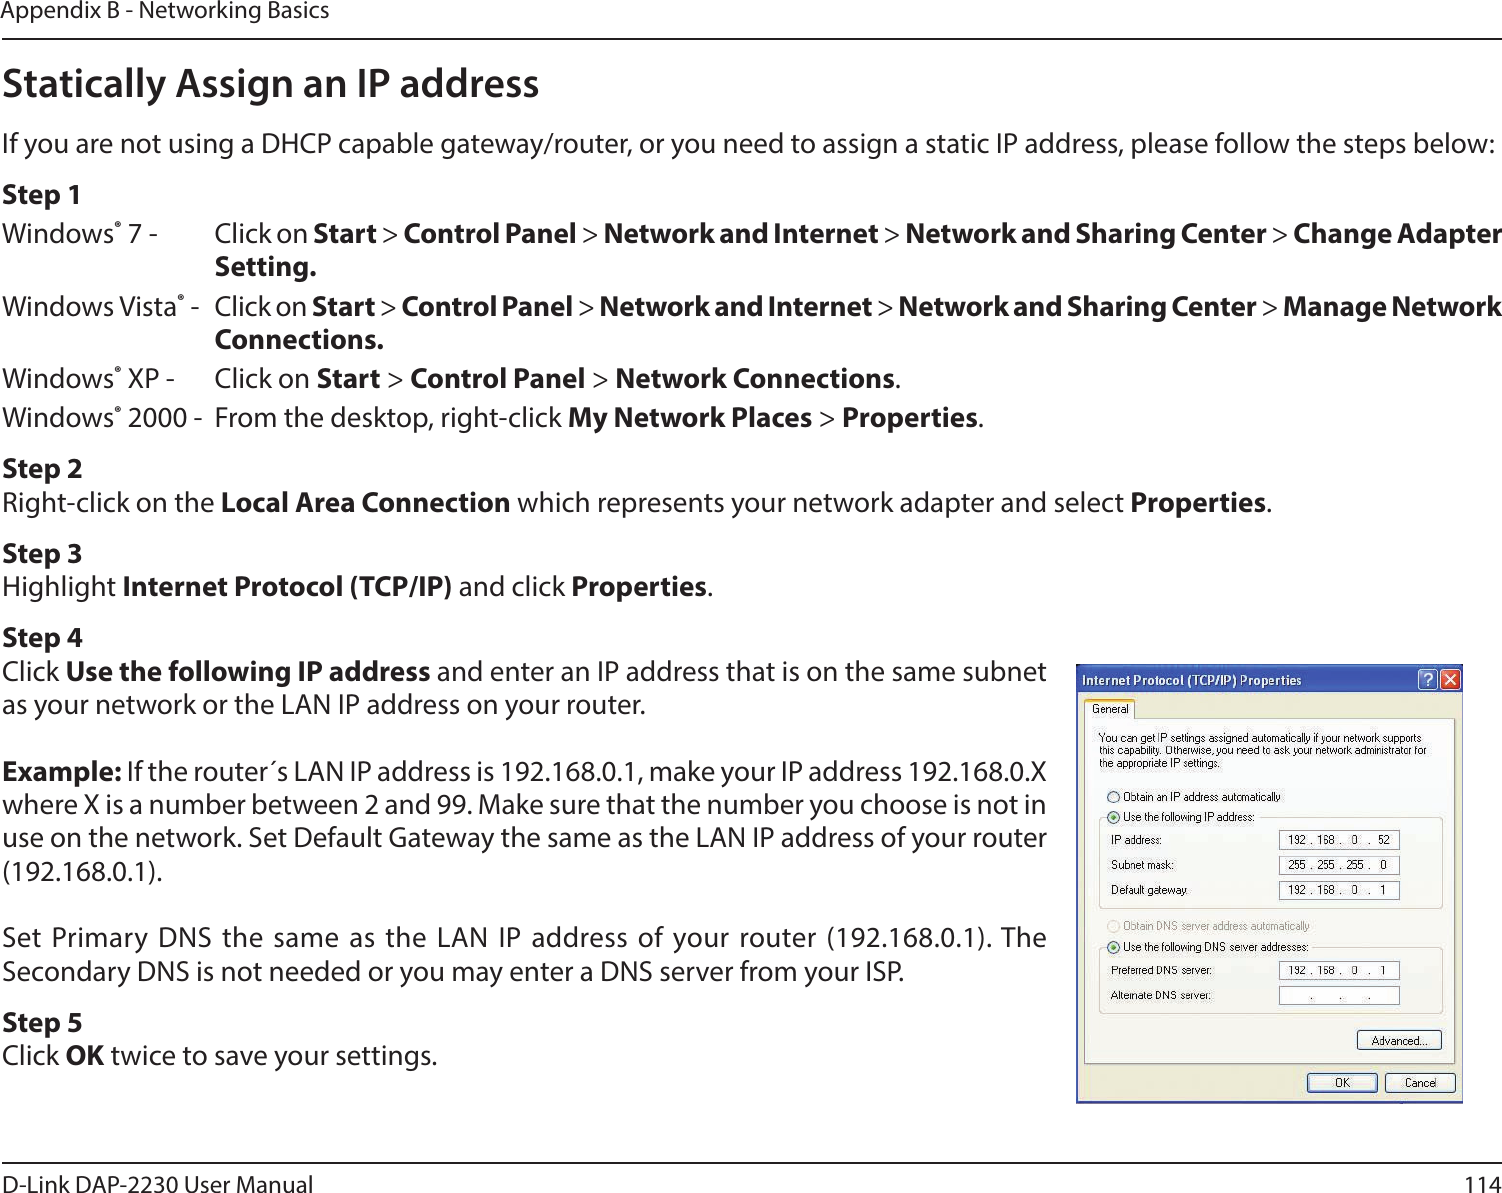 114D-Link DAP-2230 User ManualAppendix B - Networking BasicsStatically Assign an IP addressIf you are not using a DHCP capable gateway/router, or you need to assign a static IP address, please follow the steps below:Step 1Windows® 7 -  Click on Start &gt; Control Panel &gt; Network and Internet &gt; Network and Sharing Center &gt; Change Adapter Setting. Windows Vista® -  Click on Start &gt; Control Panel &gt; Network and Internet &gt; Network and Sharing Center &gt; Manage Network Connections.Windows® XP -  Click on Start &gt; Control Panel &gt; Network Connections.Windows® 2000 -  From the desktop, right-click My Network Places &gt; Properties.Step 2Right-click on the Local Area Connection which represents your network adapter and select Properties.Step 3Highlight Internet Protocol (TCP/IP) and click Properties.Step 4Click Use the following IP address and enter an IP address that is on the same subnet as your network or the LAN IP address on your router.Example: If the router´s LAN IP address is 192.168.0.1, make your IP address 192.168.0.X where X is a number between 2 and 99. Make sure that the number you choose is not in use on the network. Set Default Gateway the same as the LAN IP address of your router (192.168.0.1). Set Primary DNS the same as the LAN IP address of your router (192.168.0.1). The Secondary DNS is not needed or you may enter a DNS server from your ISP.Step 5Click OK twice to save your settings.